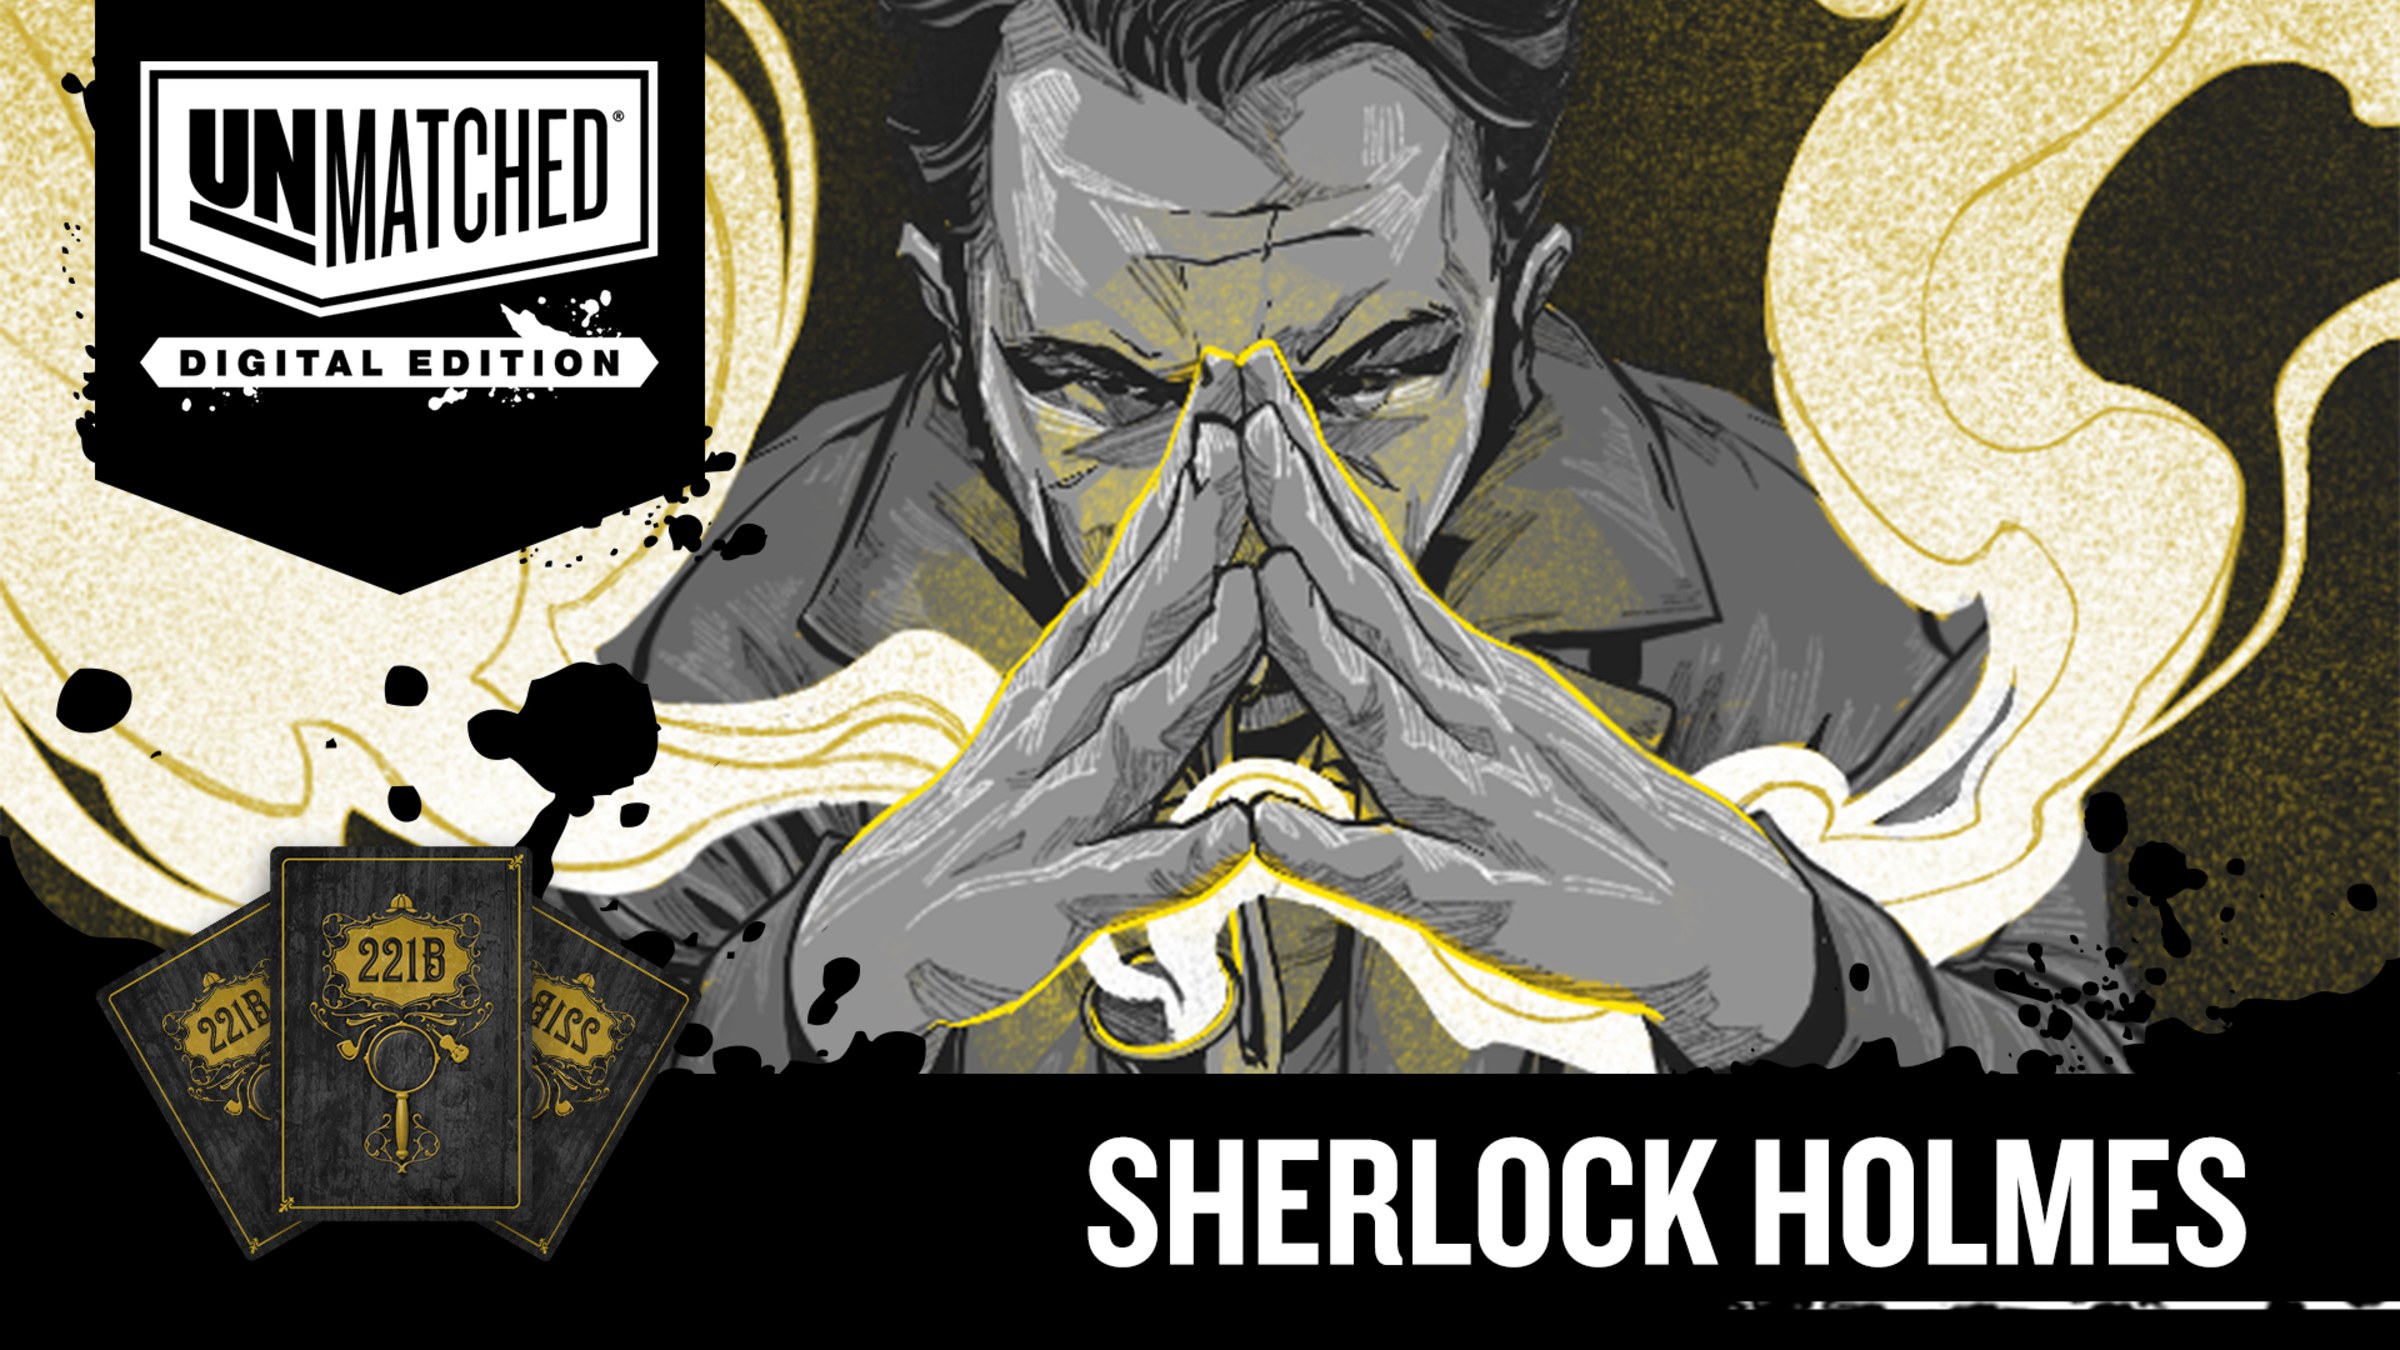 Unmatched: Digital Edition - Sherlock Holmes for Nintendo Switch - Nintendo  Official Site